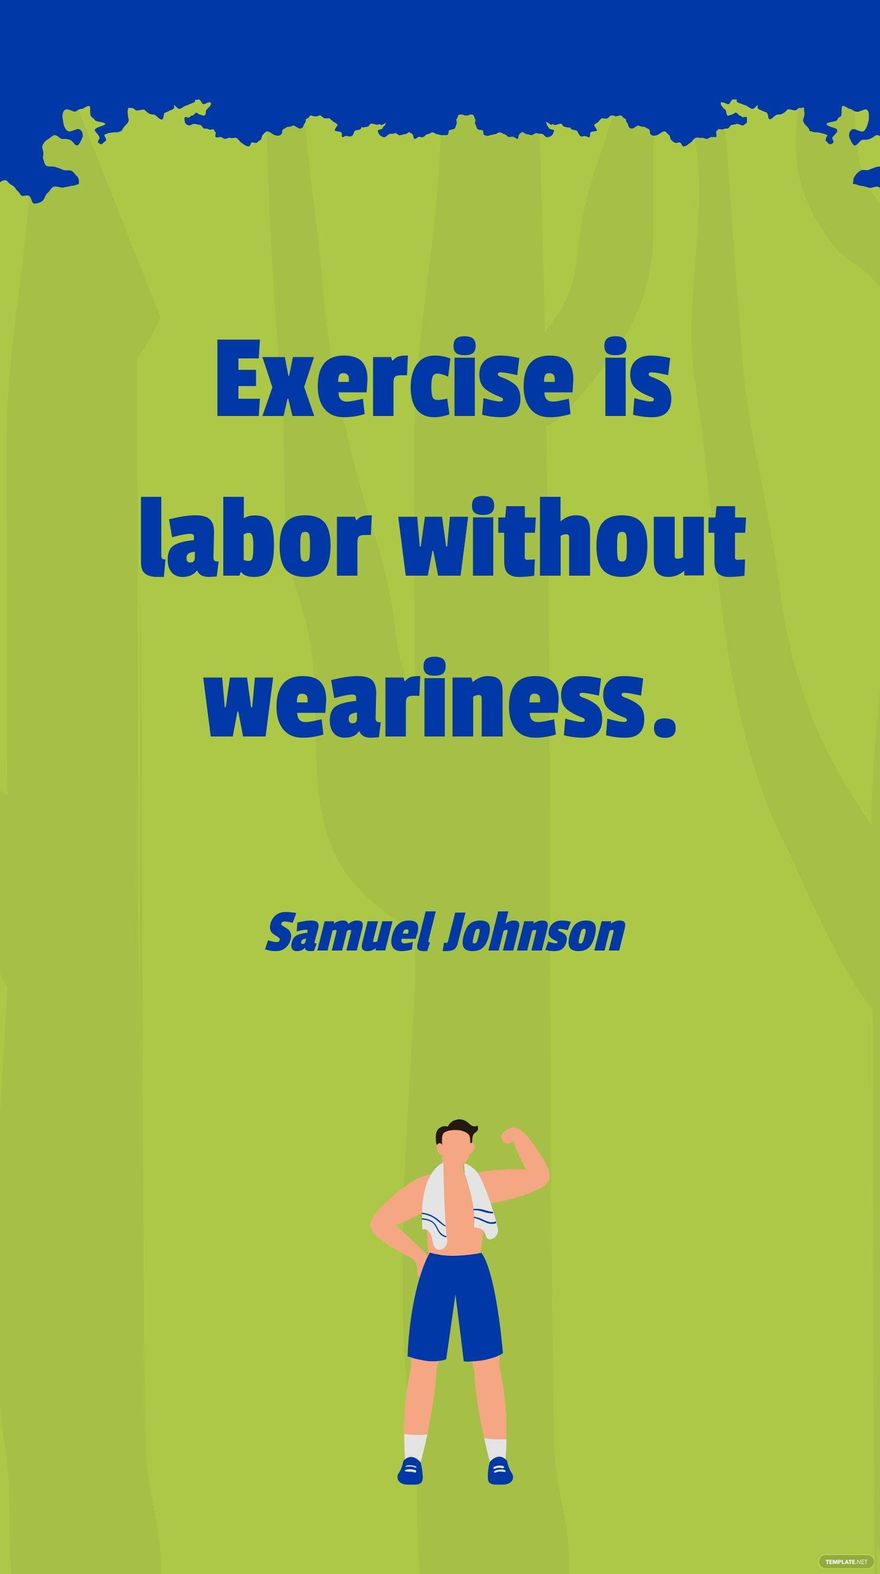 Samuel Johnson - Exercise is labor without weariness.